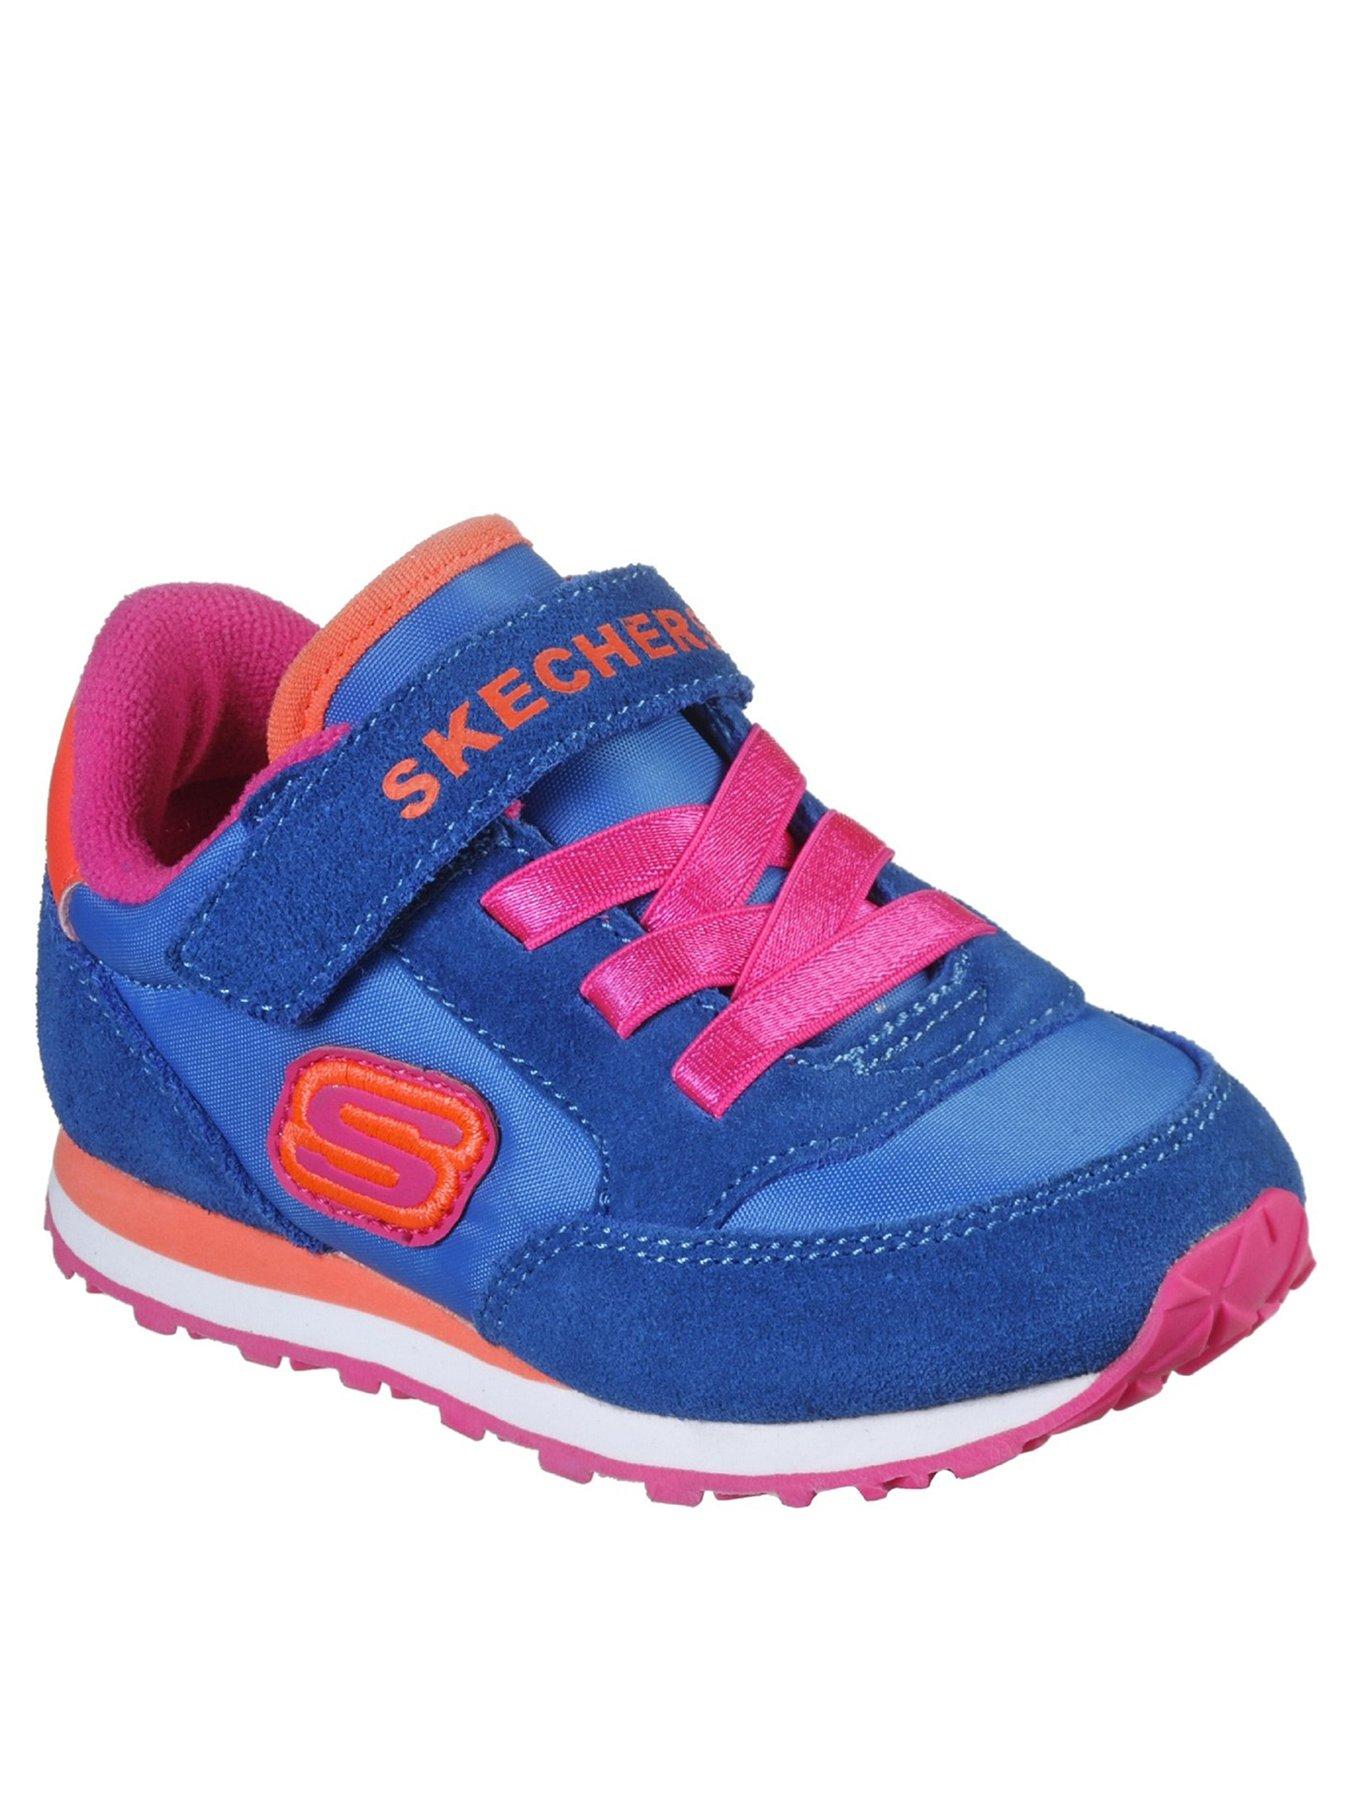 Skechers Toddler Girls Strap Trainers 